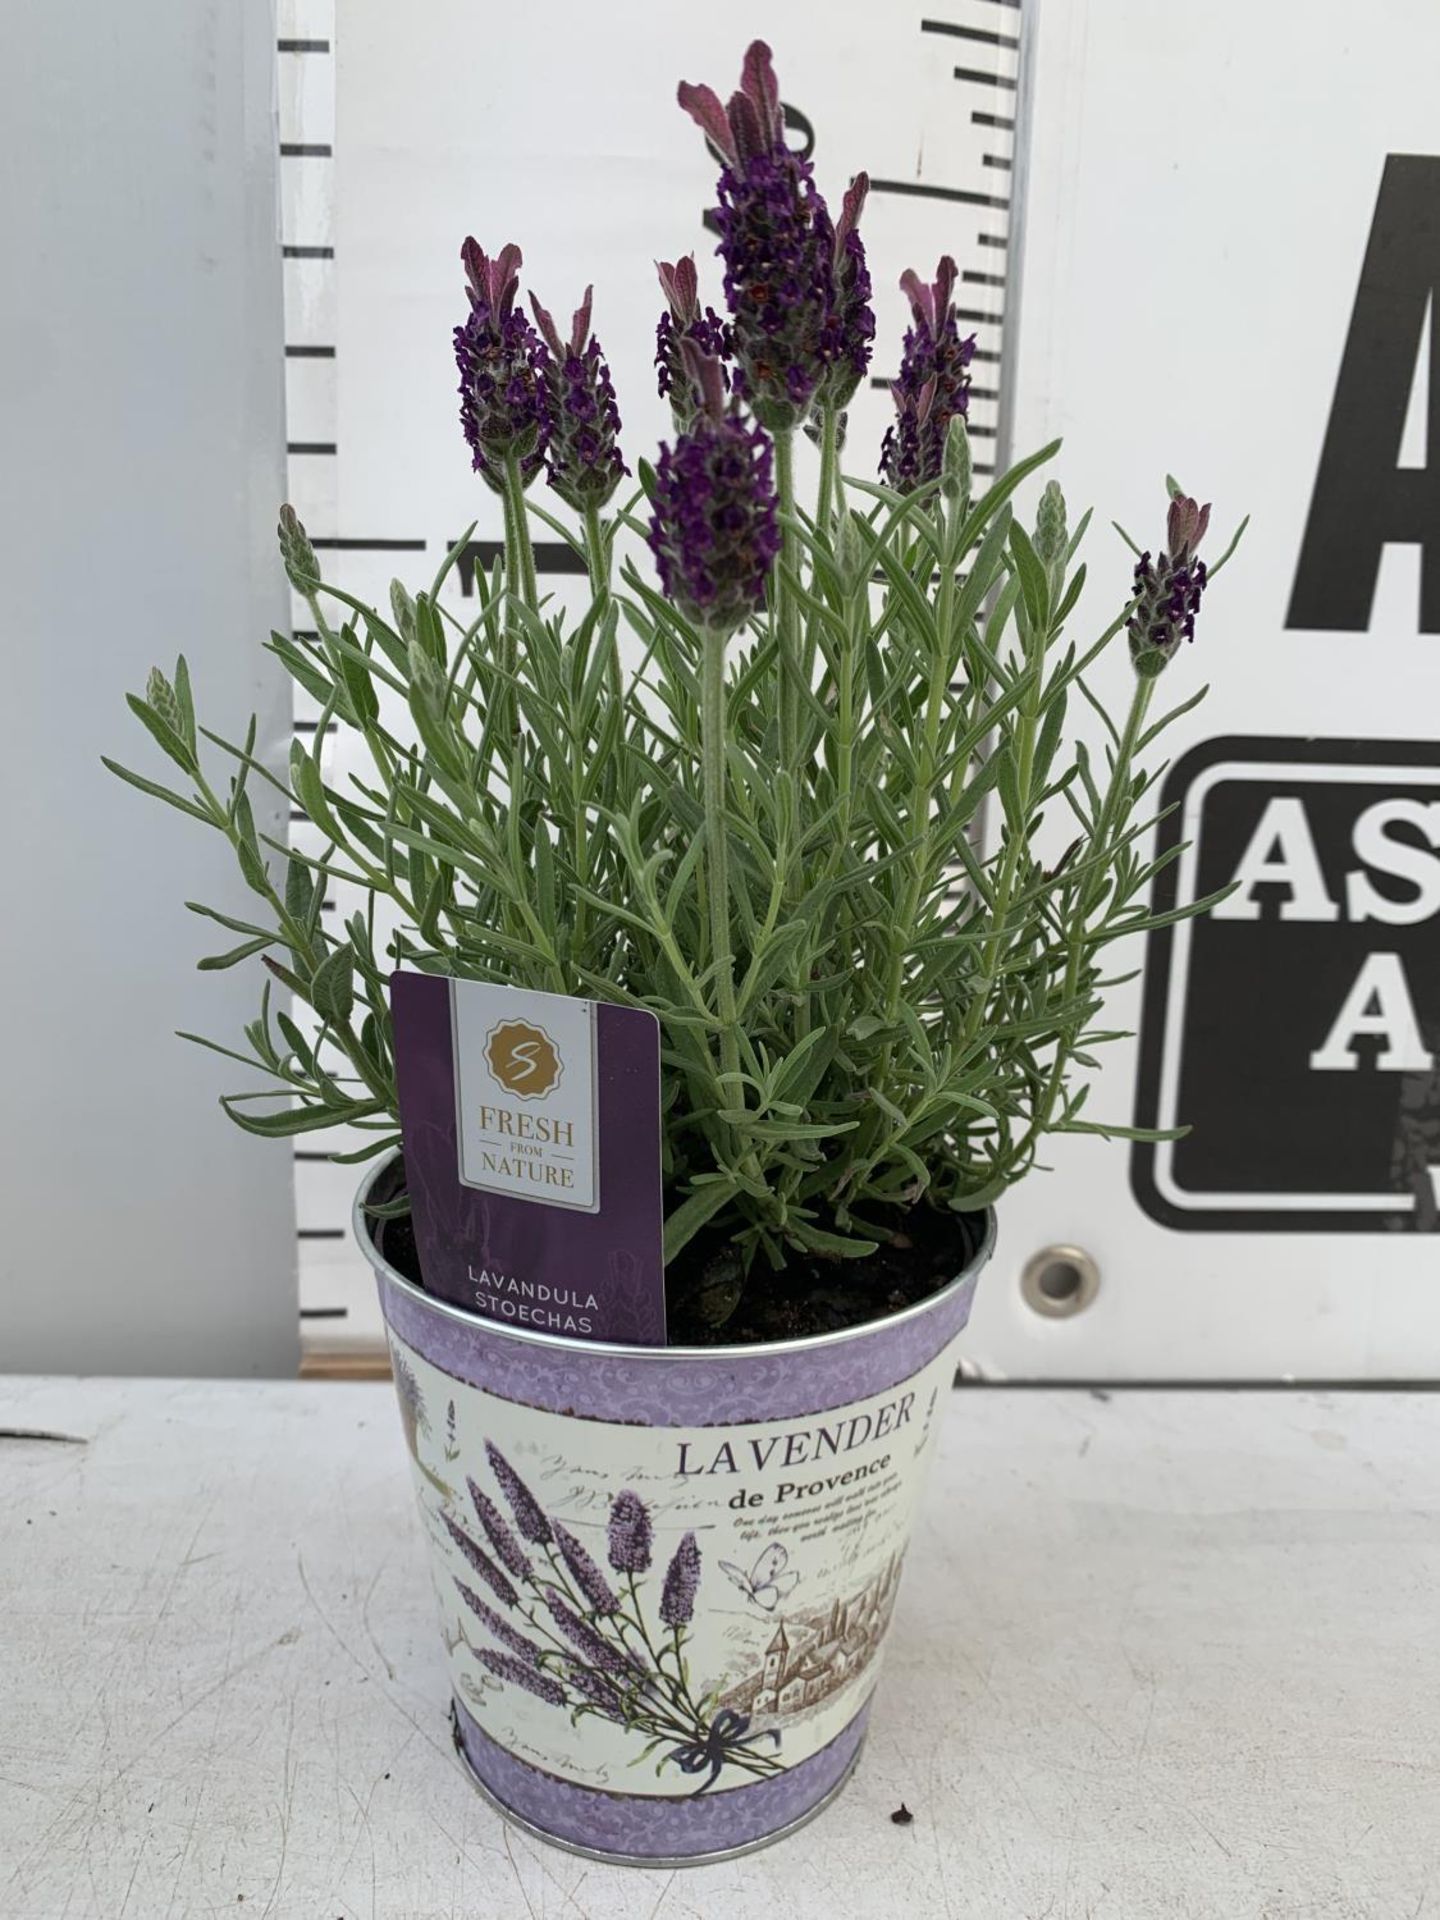 SIX LAVENDULA LAVENDER ST ANOUK COLLECTION IN DECORATIVE METAL POTS TO BE SOLD FOR THE SIX NO VAT - Image 6 of 8